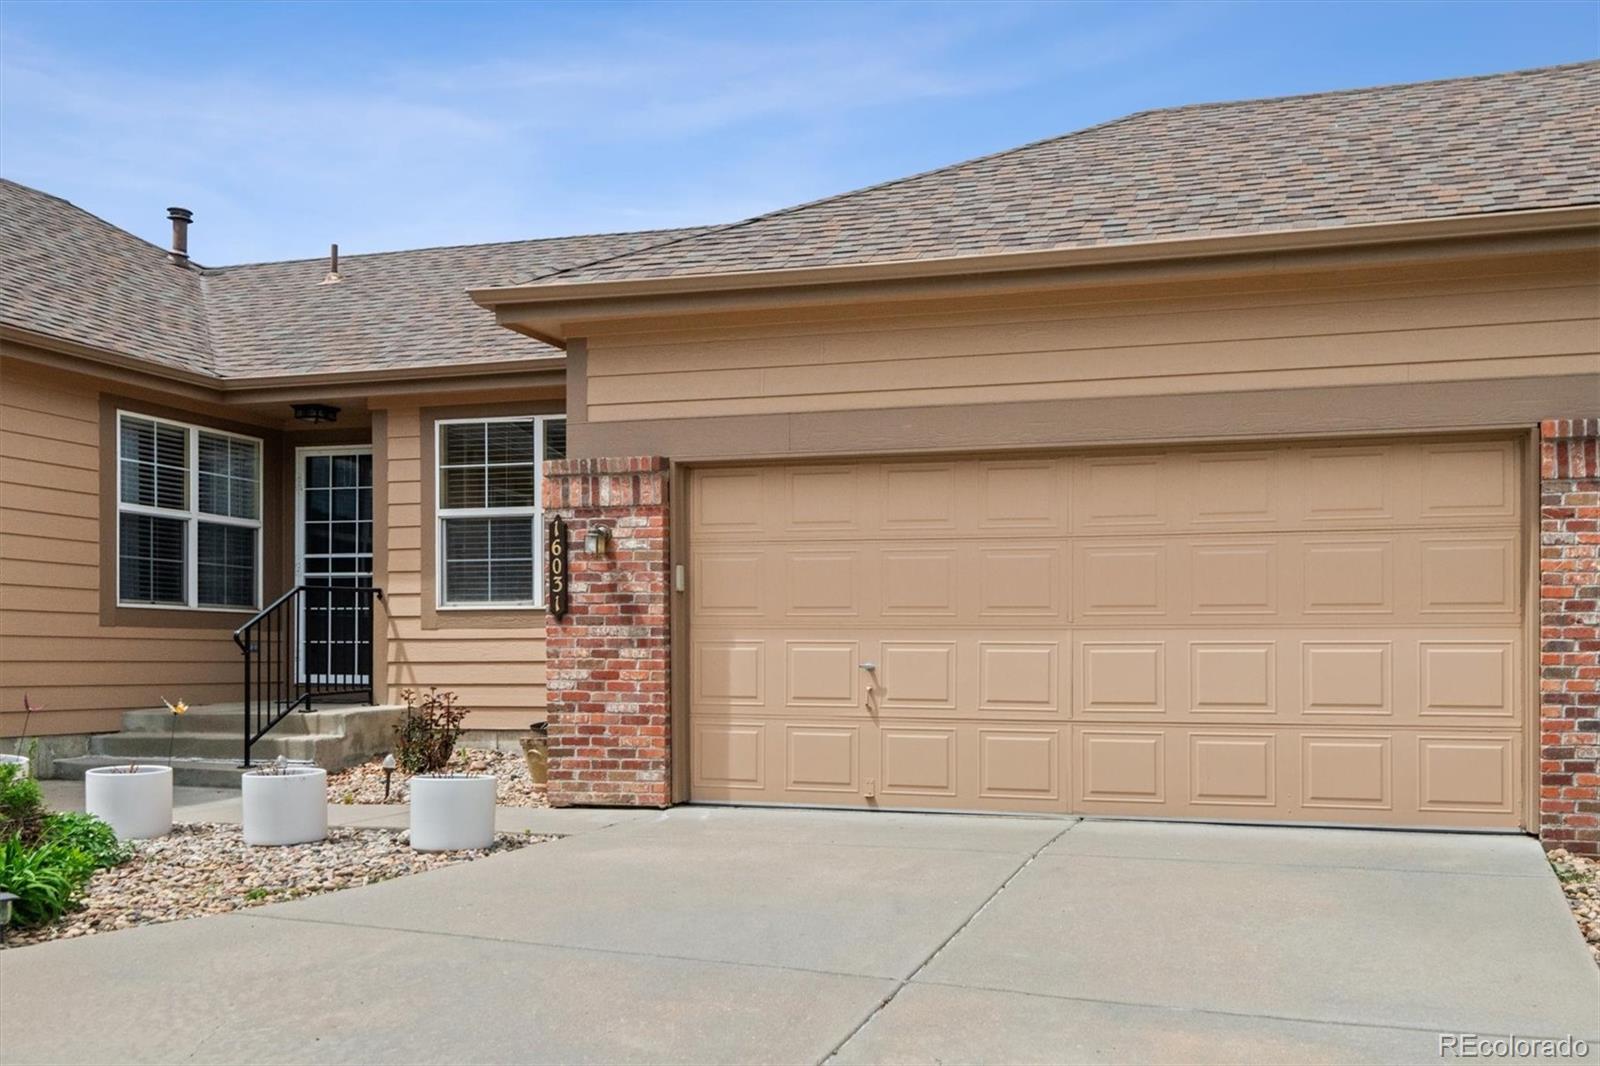 16031 w 64th way, Arvada sold home. Closed on 2024-05-21 for $670,000.